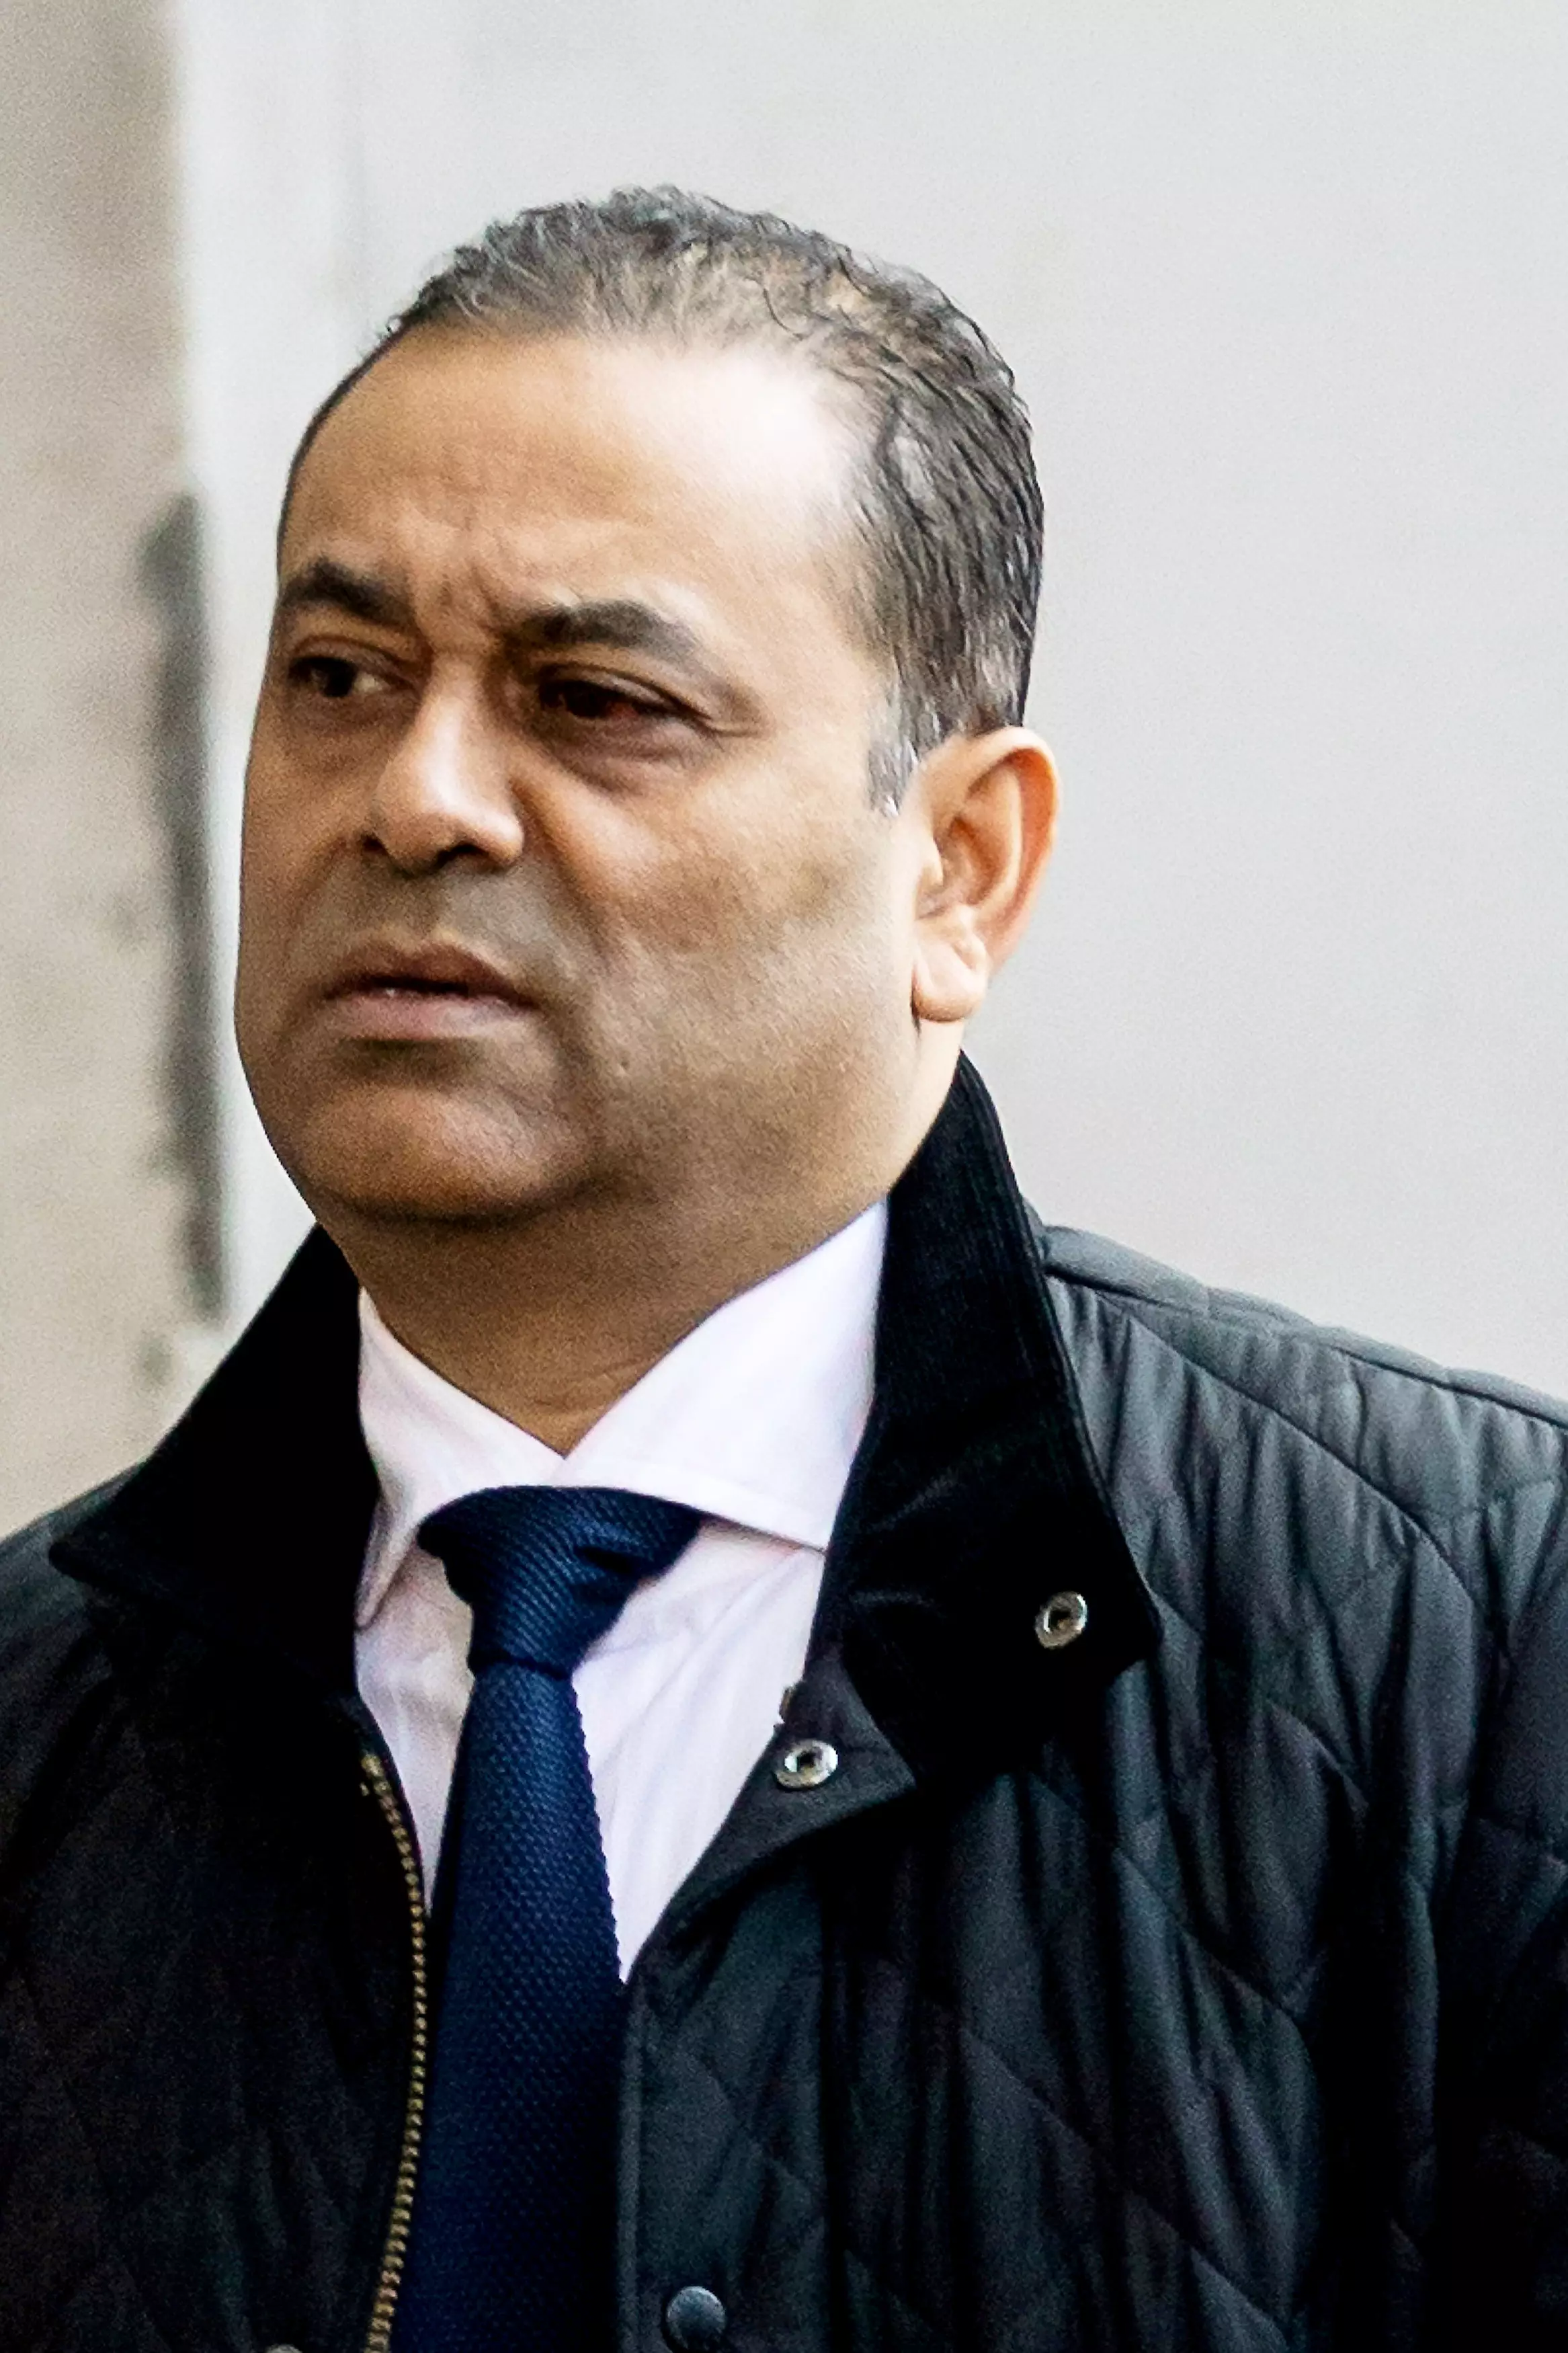 Patel was banned from practising for a year.